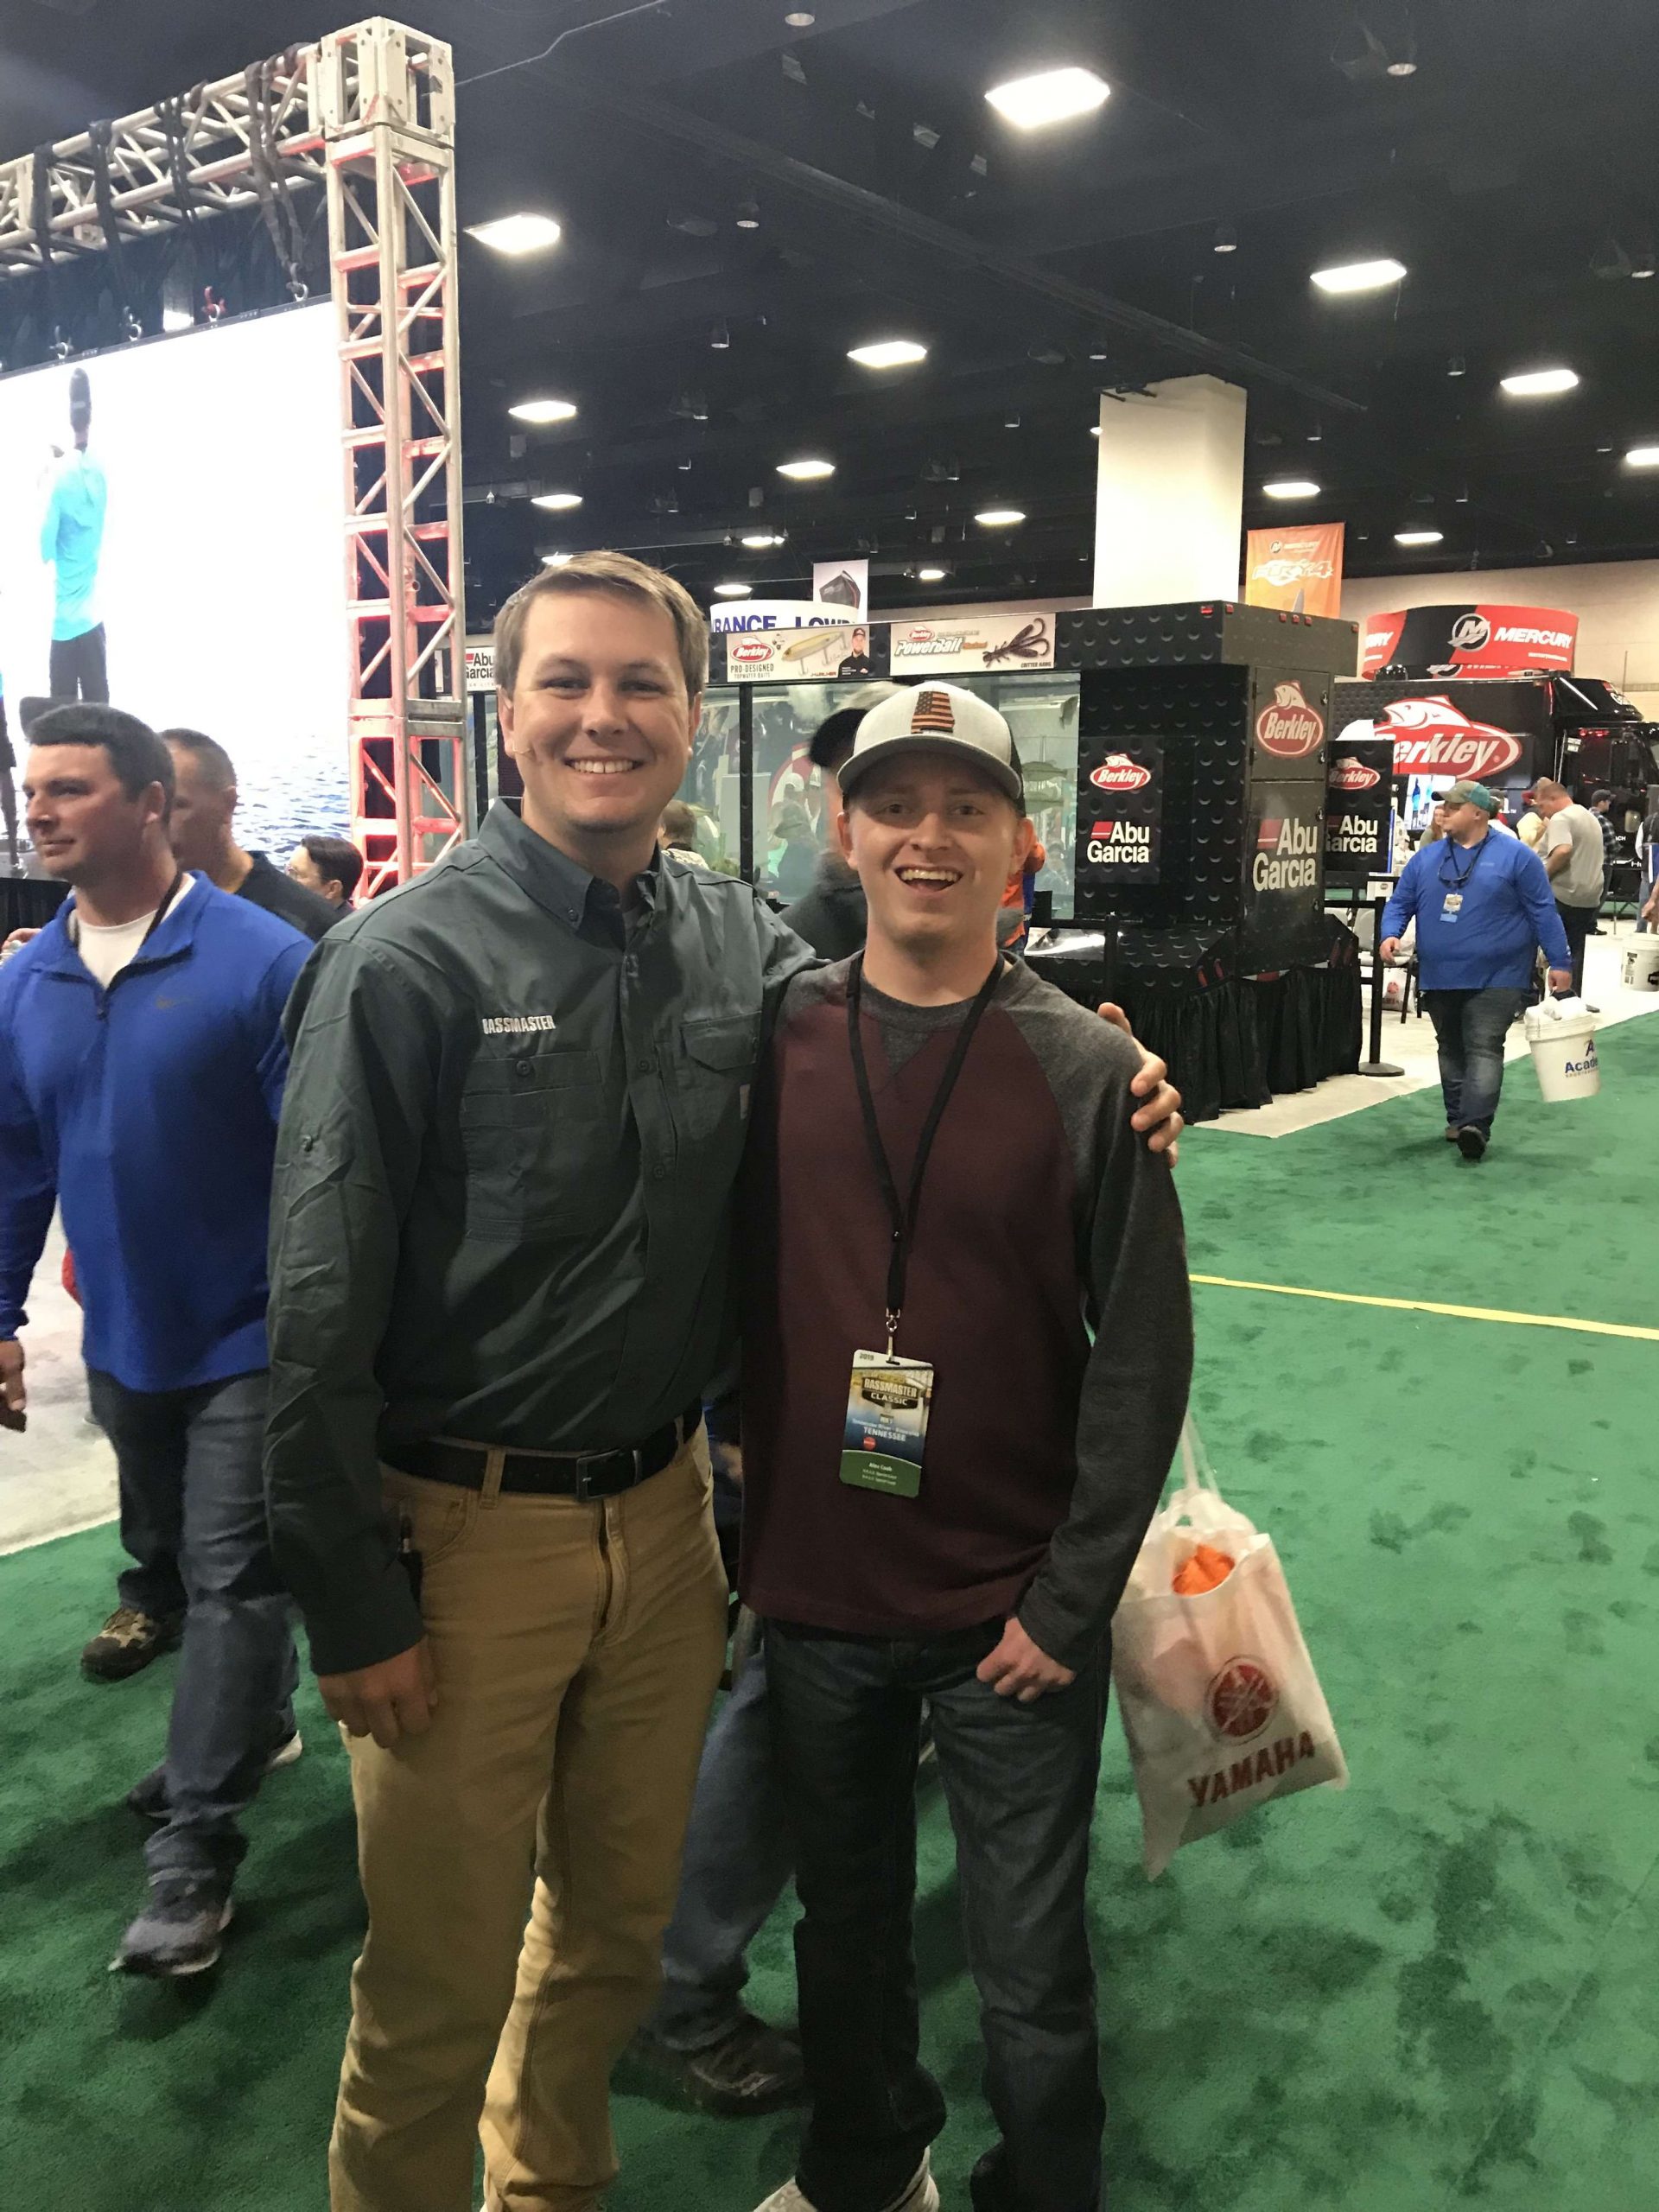 He took photos throughout his time at the Bassmaster Classic, while he was at the Expo, takeoff and weigh-ins.